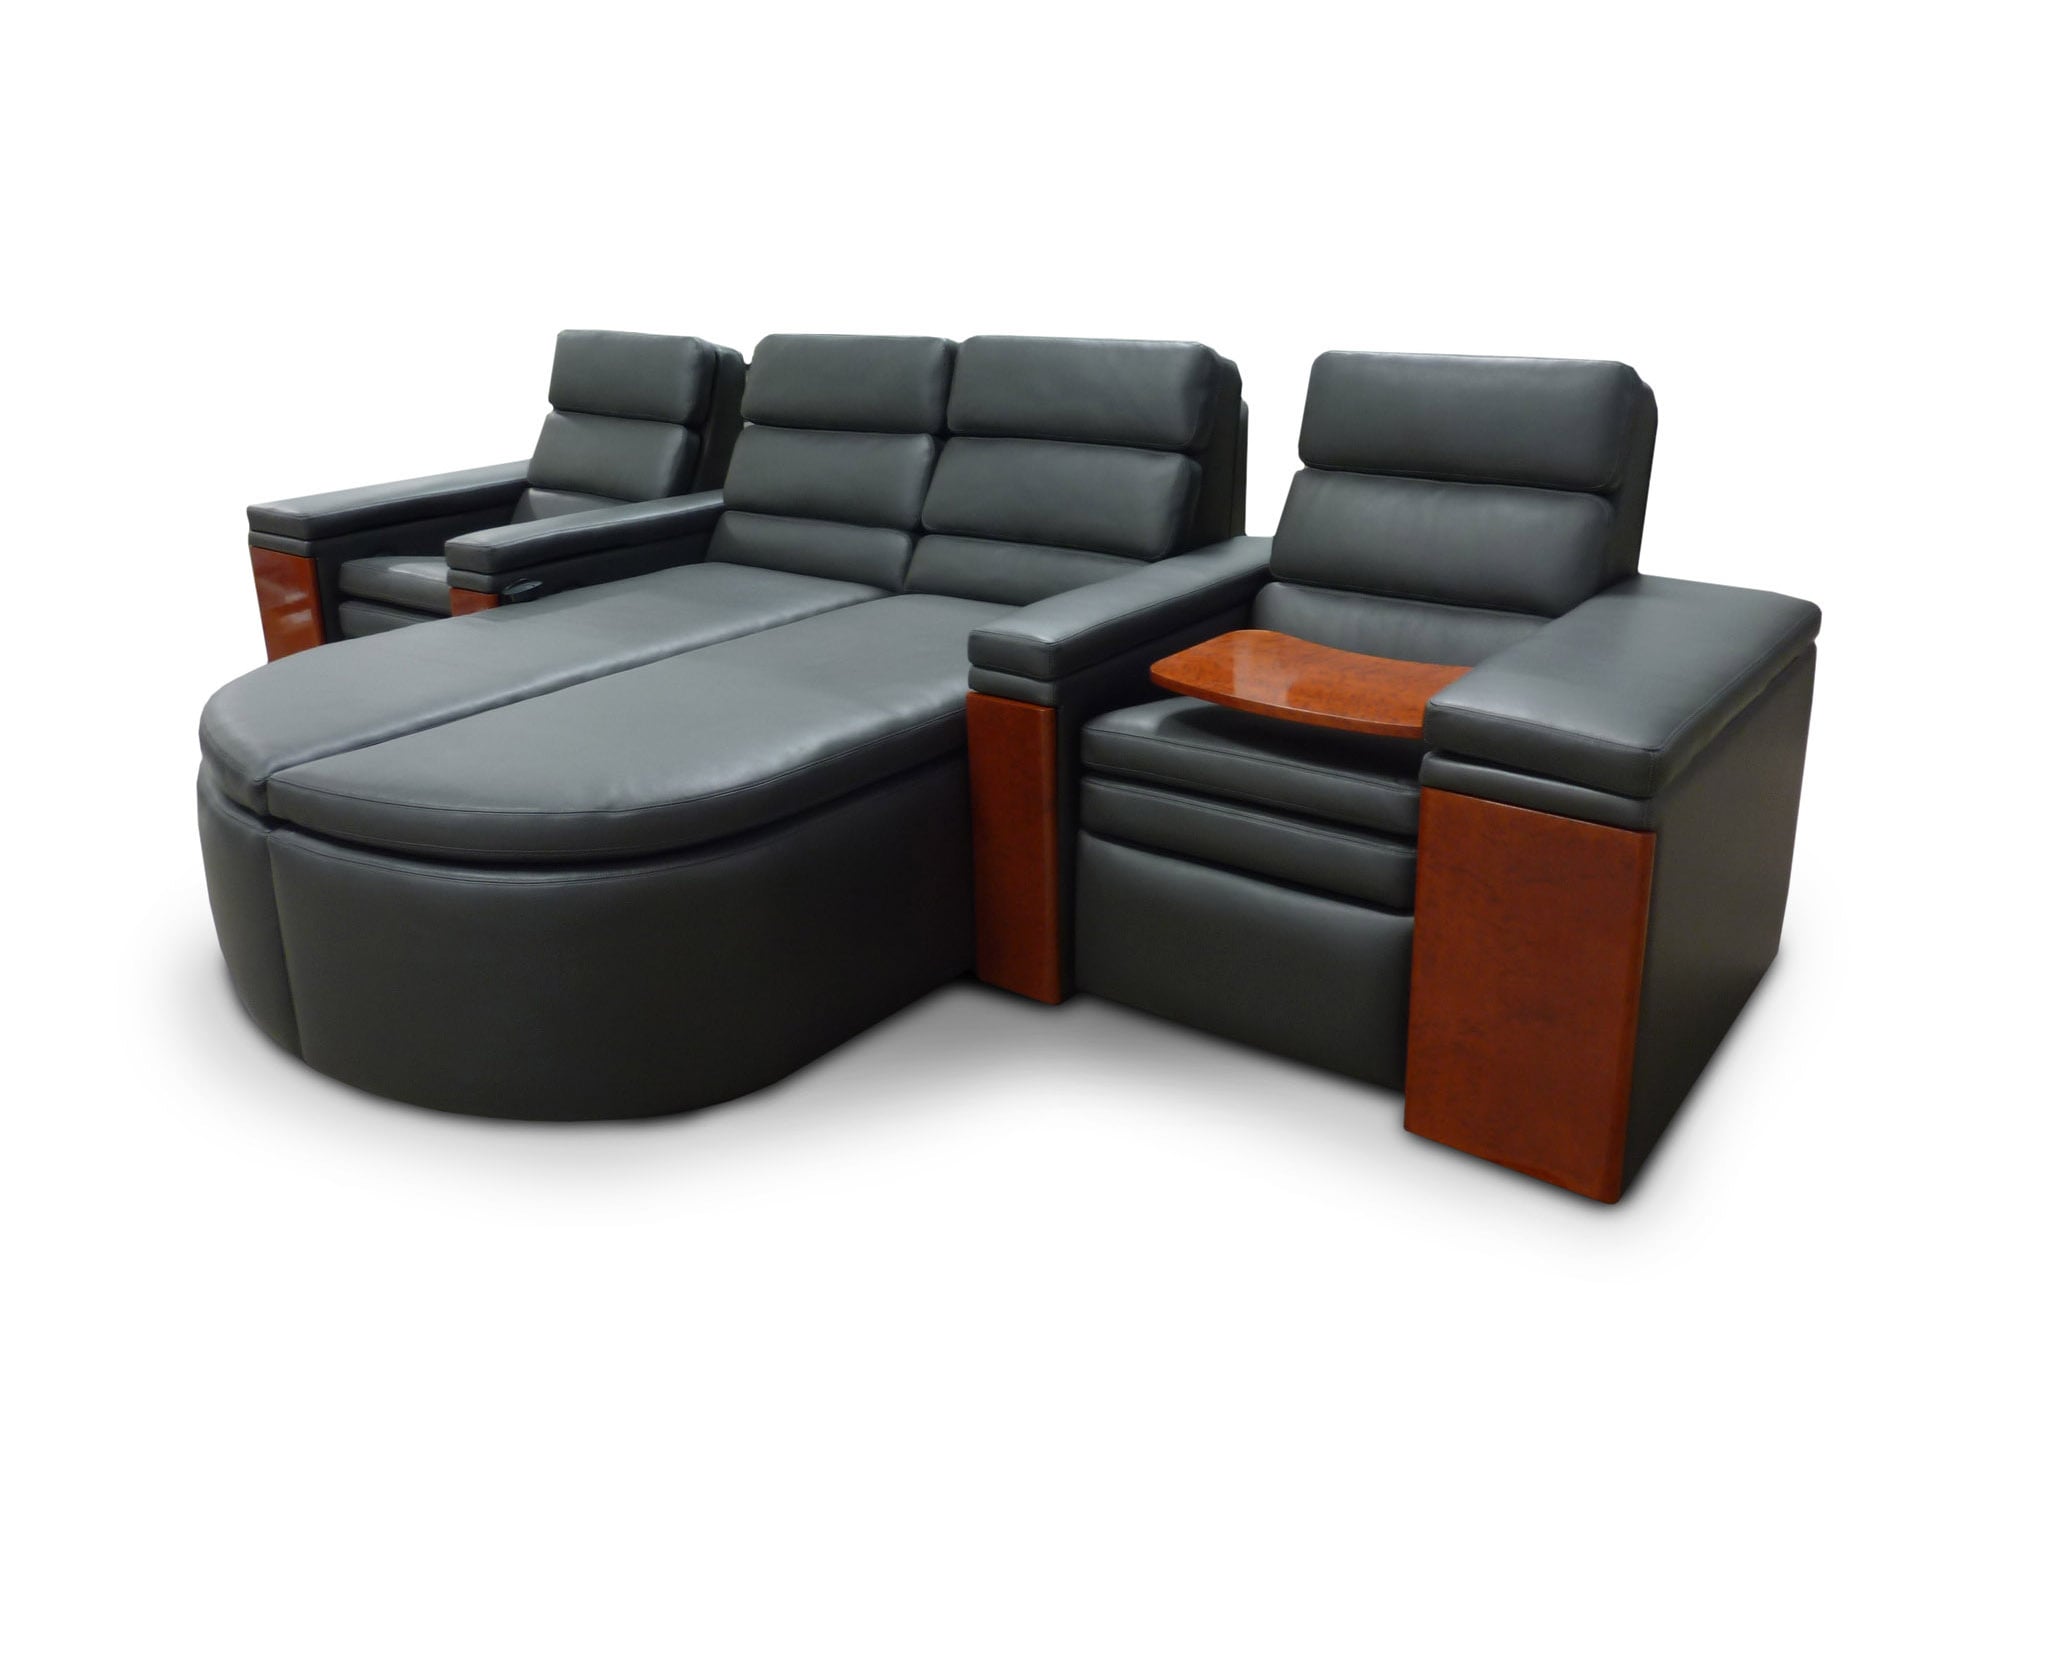   Concealed &amp; Motorized First Class Tray Tables;&nbsp; Model: Solo Single-Dual Lounger-Single  